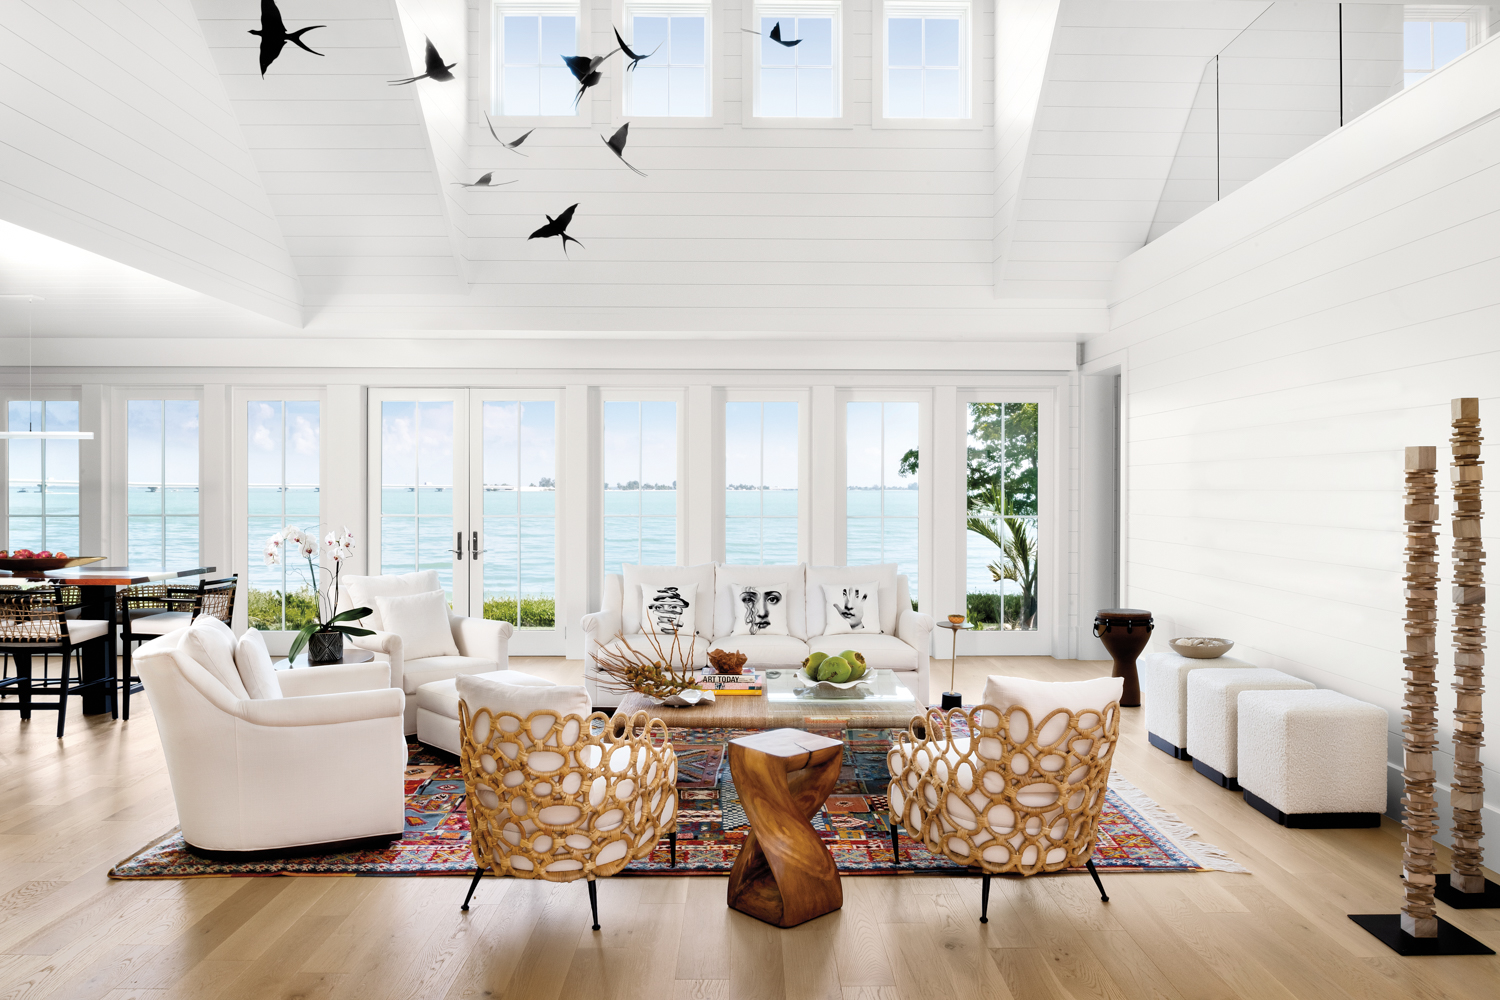 Tour A Whimsical Island Home With A Contemporary Twist